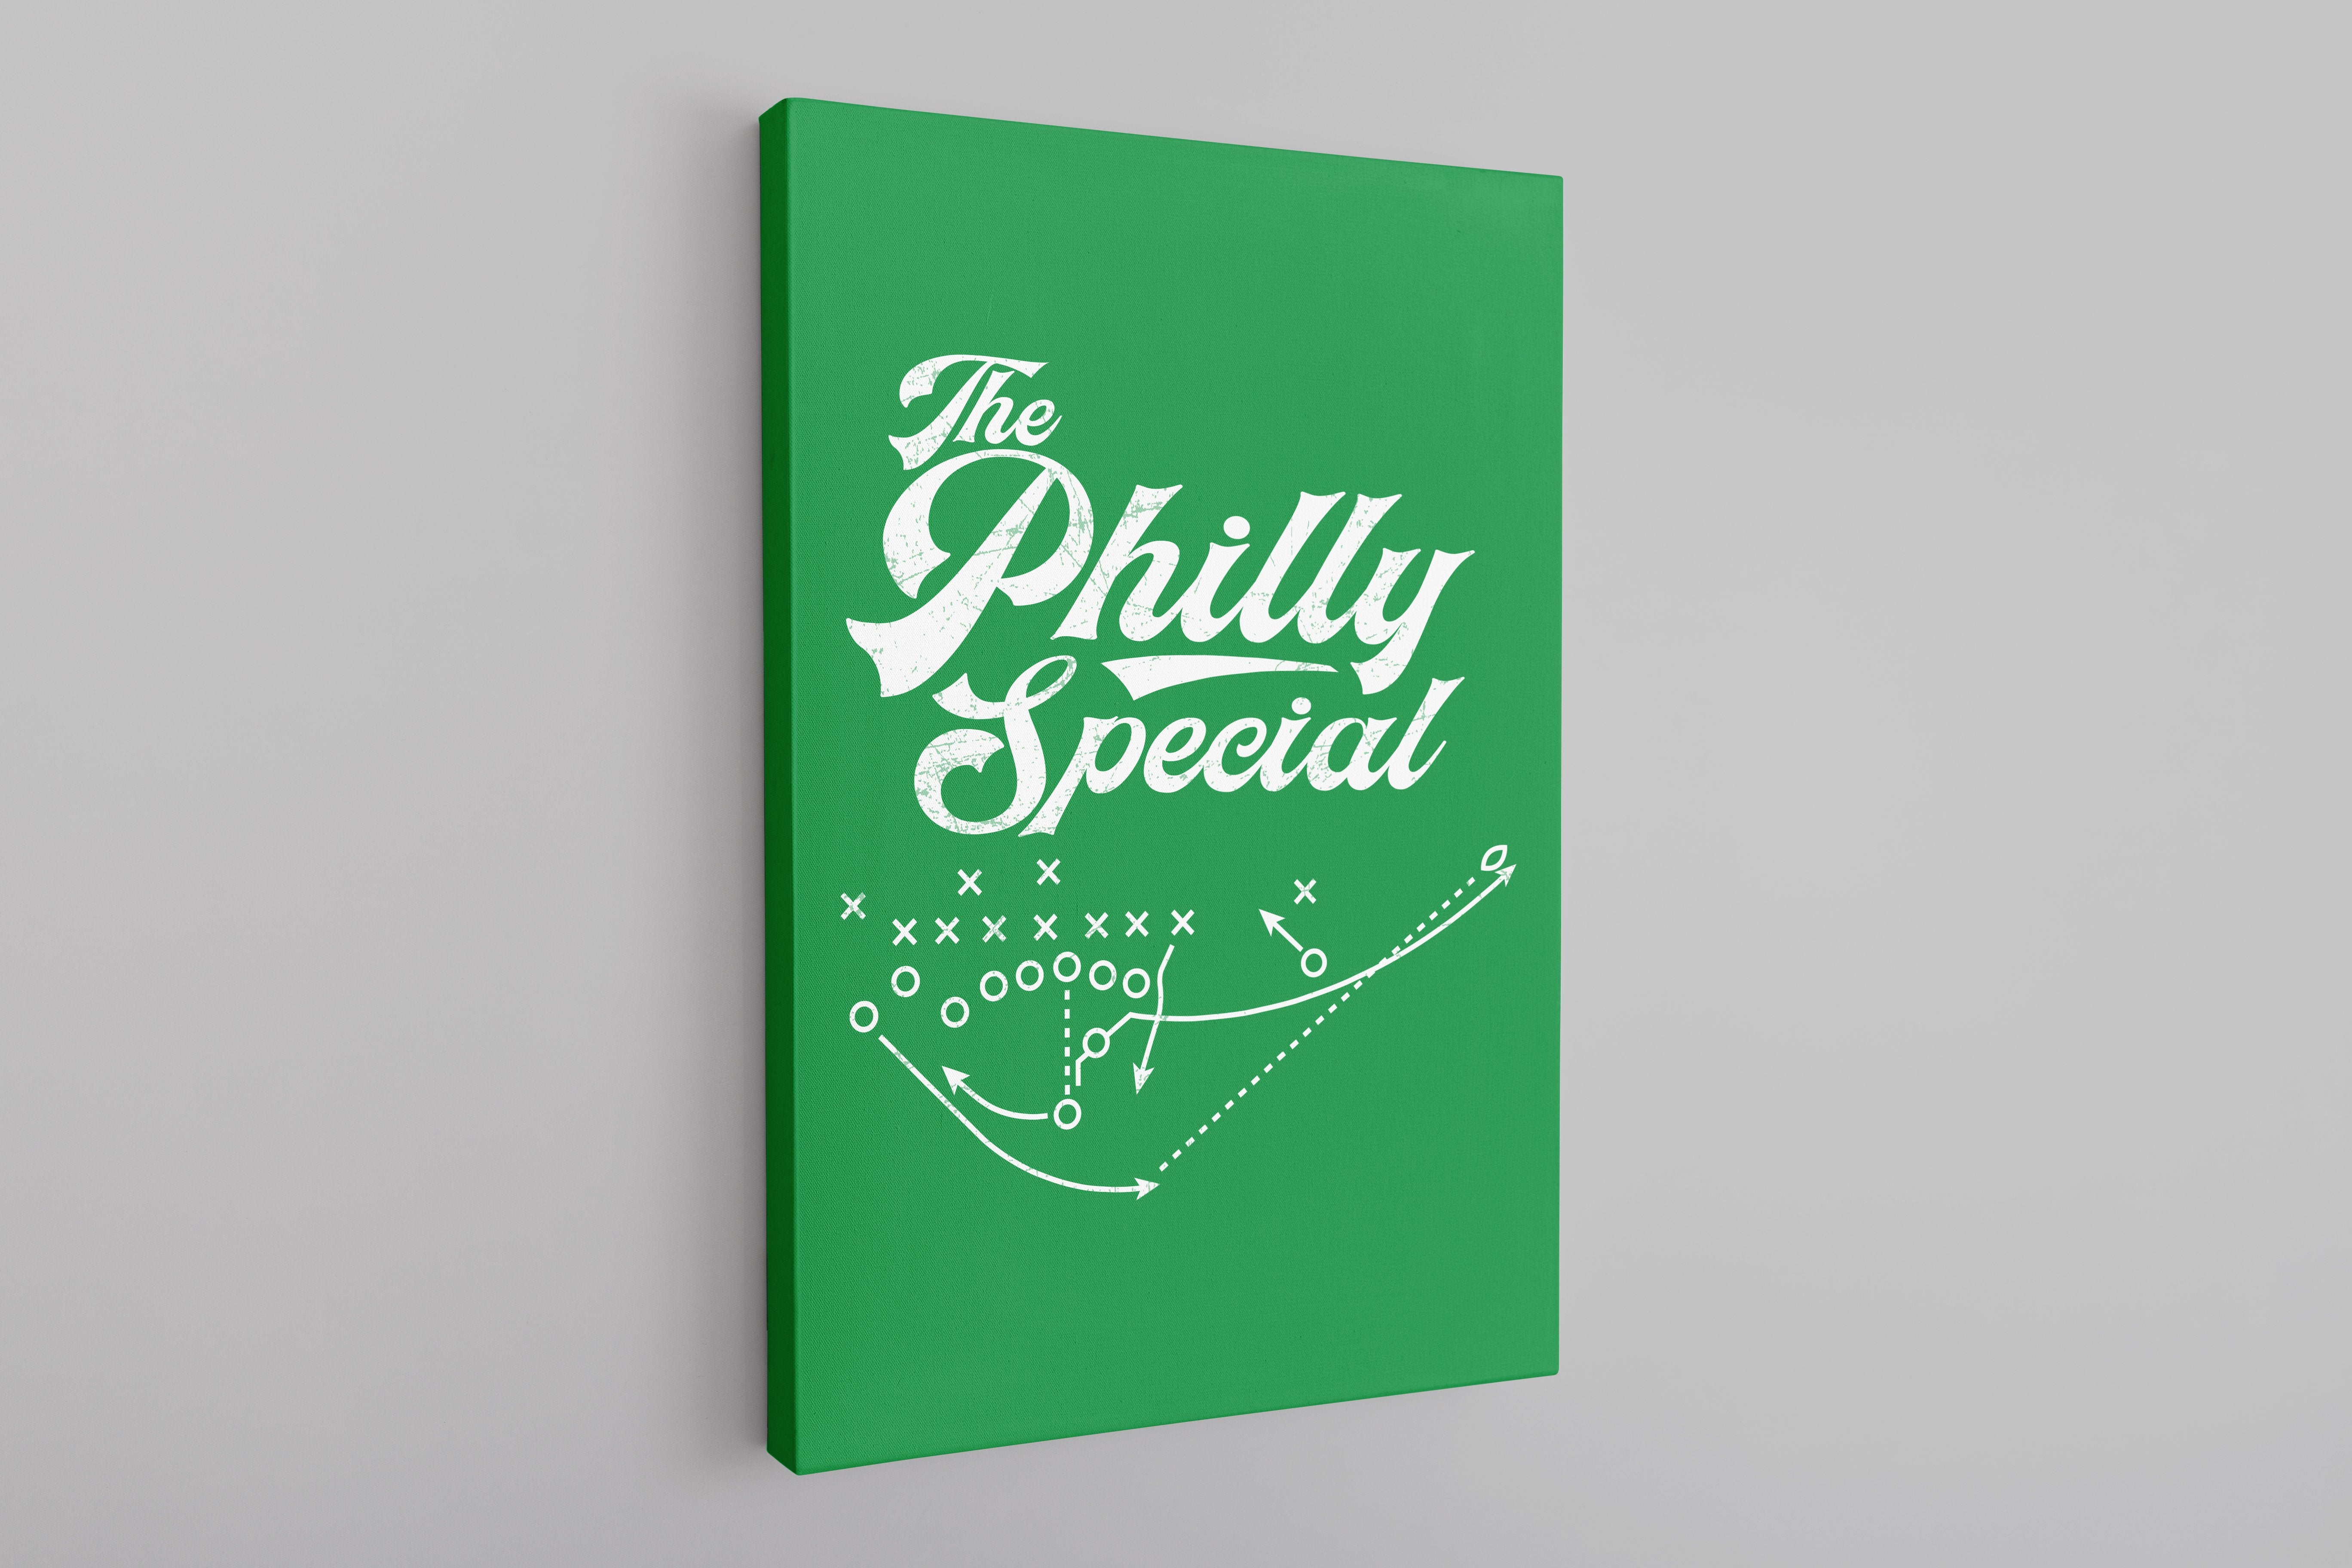 Is this Philly Special play diagram correct? : r/eagles